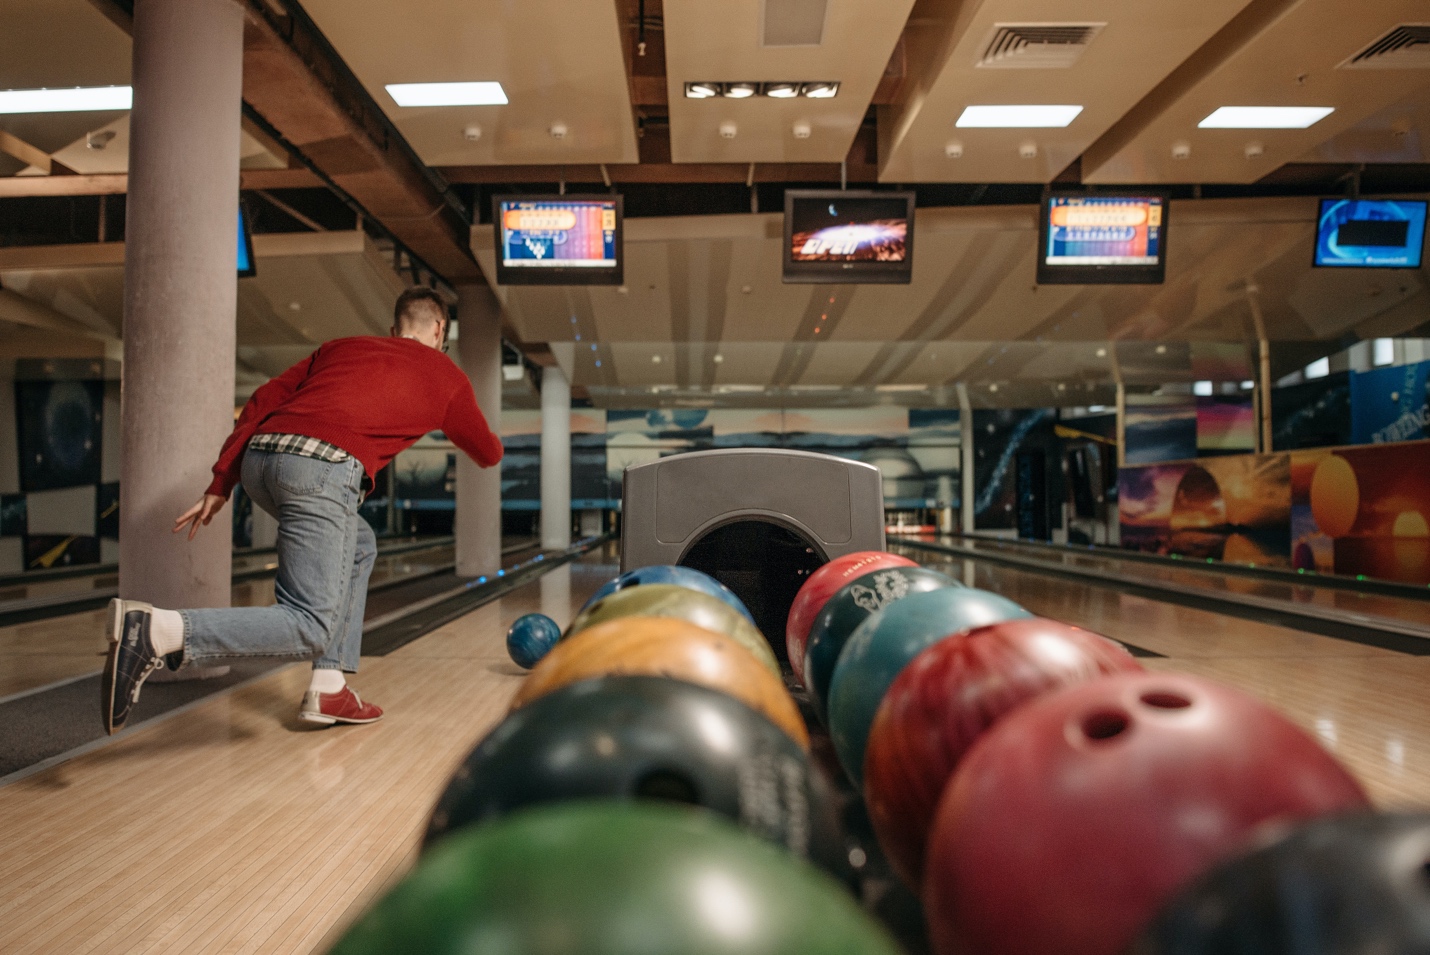 From Gutter Balls to Turkeys: Unleashing Your Bowling Potential